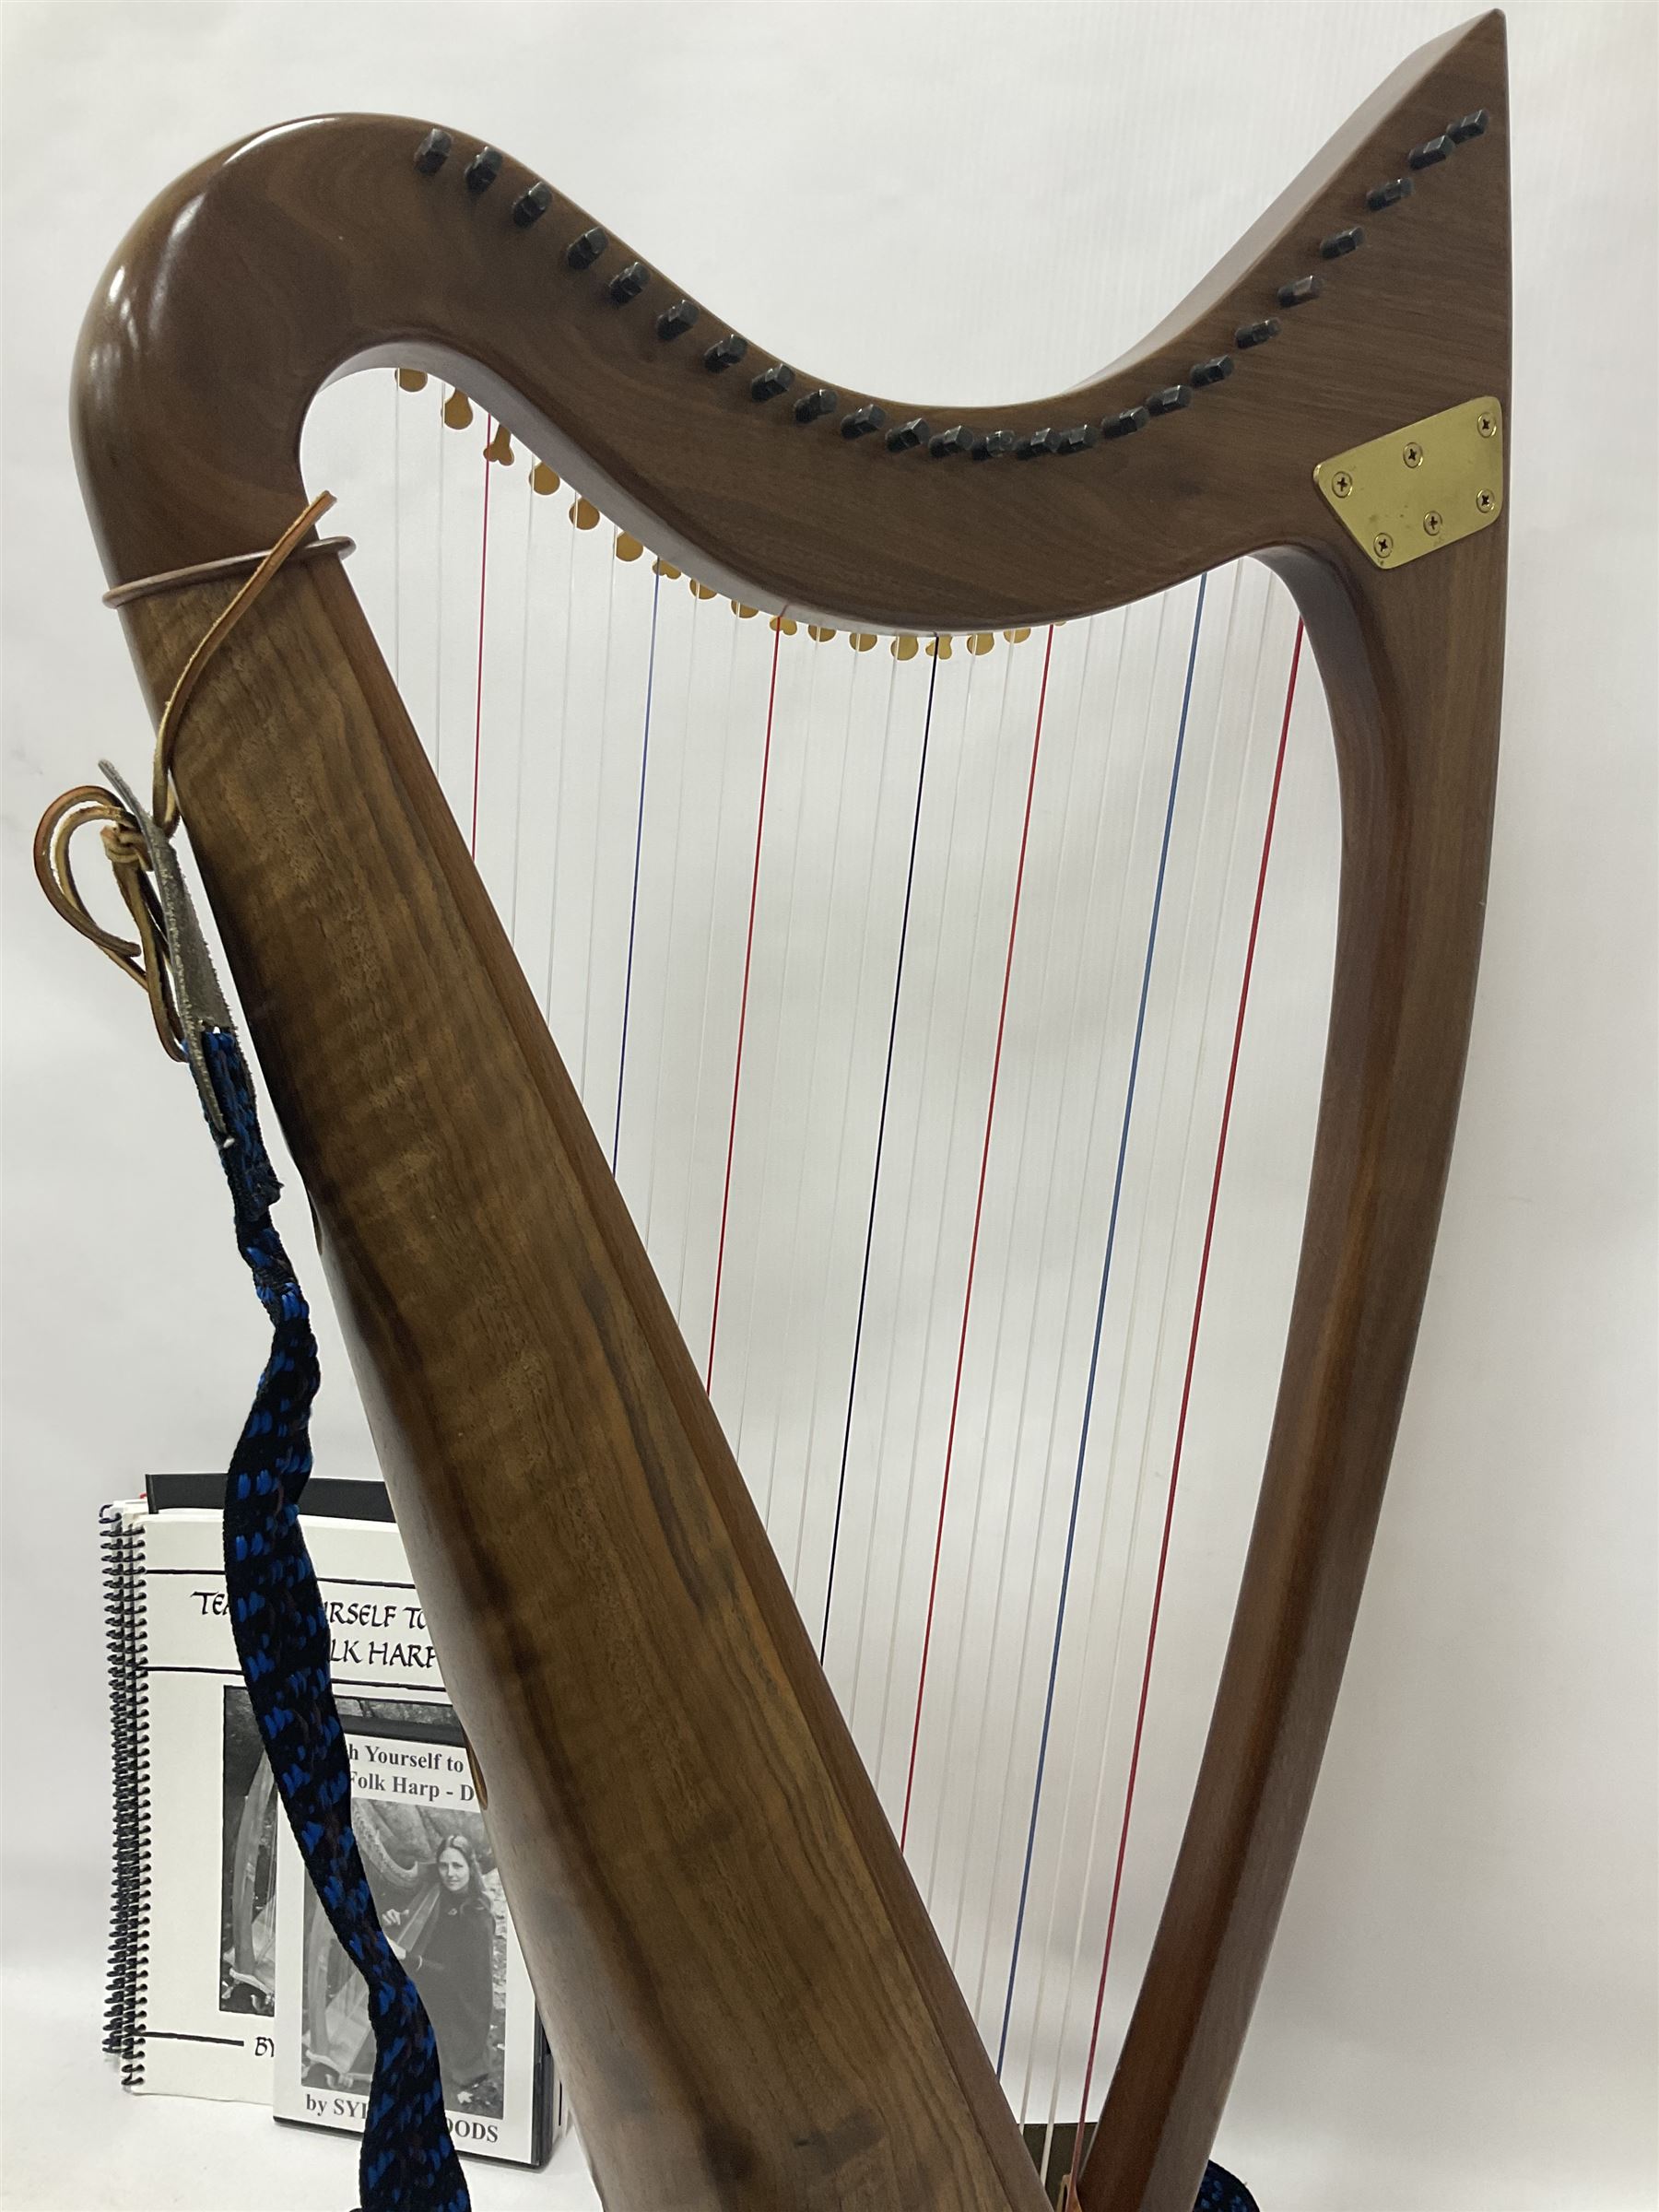 Contemporary 24 string Celtic or Irish Folk Harp with an Ash soundboard and 24 sharpening keys - Image 15 of 15